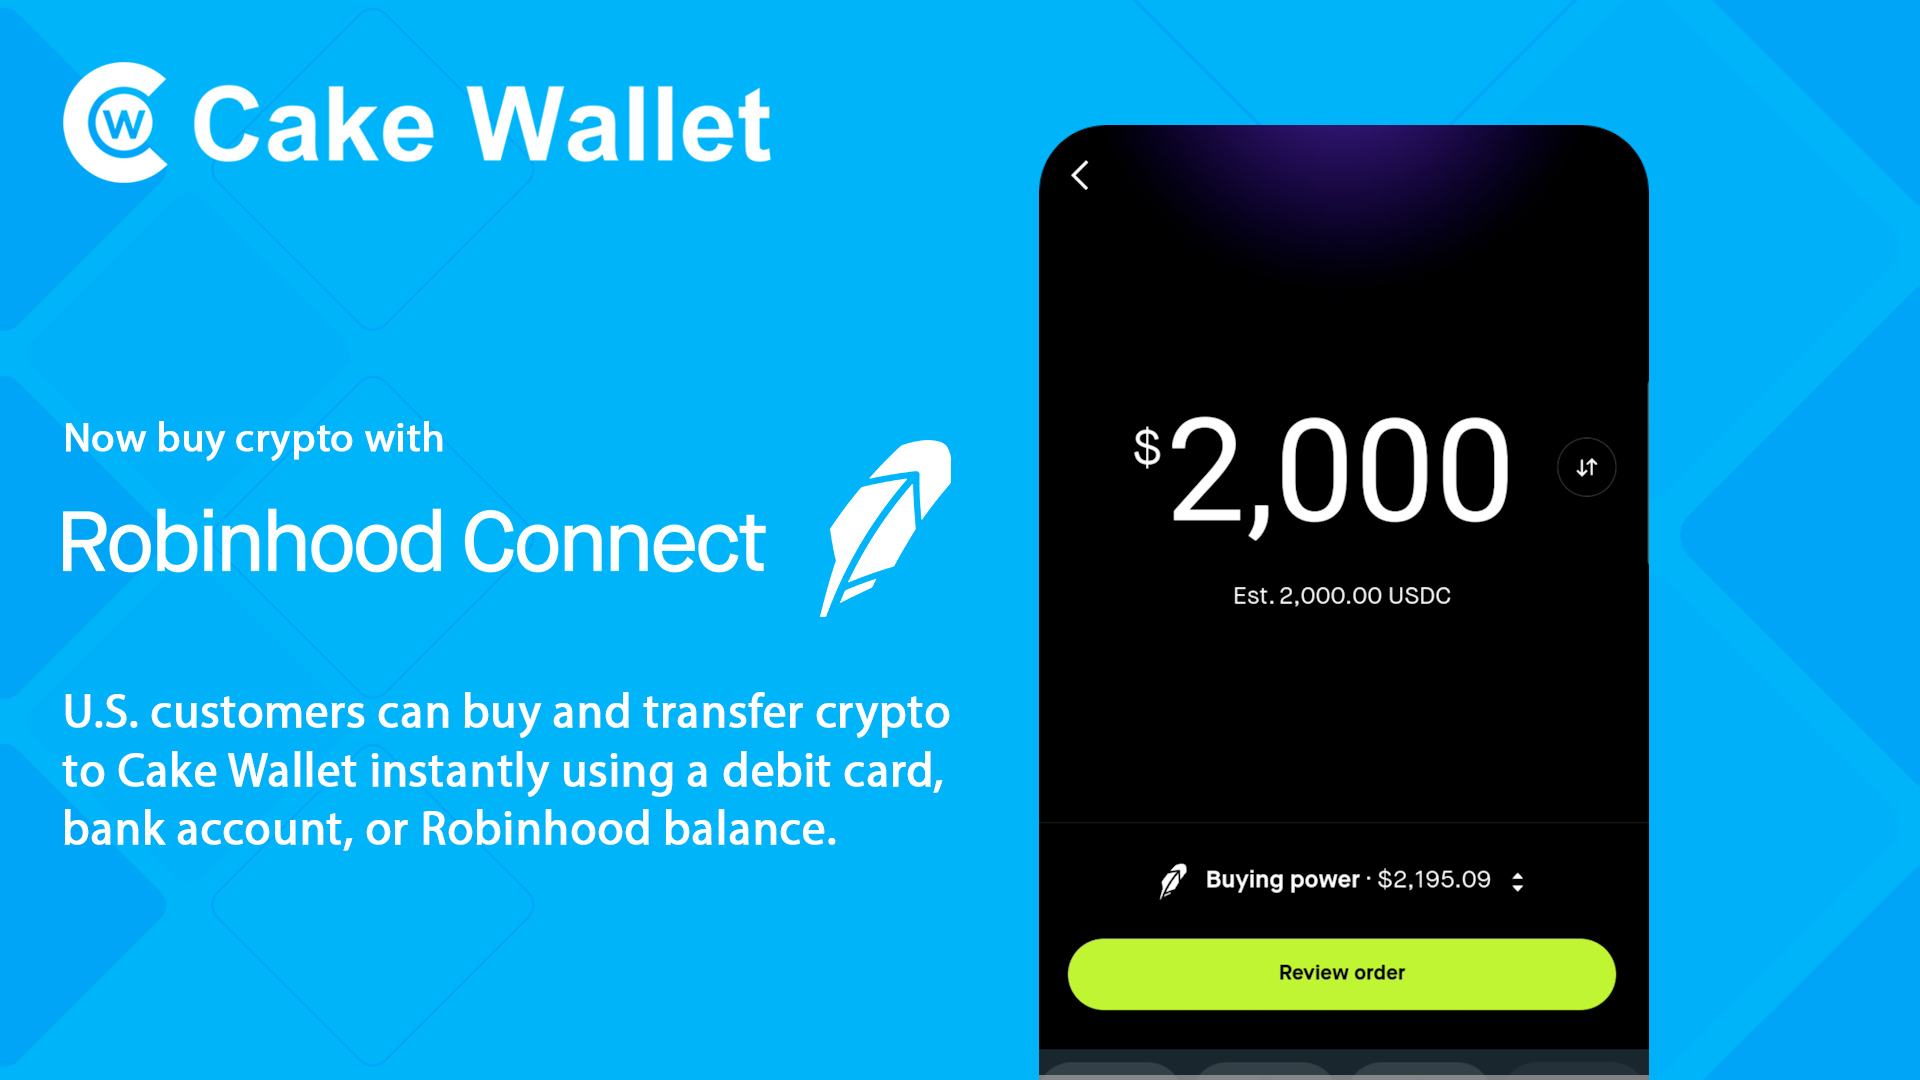 Cake Wallet Adds Robinhood Connect